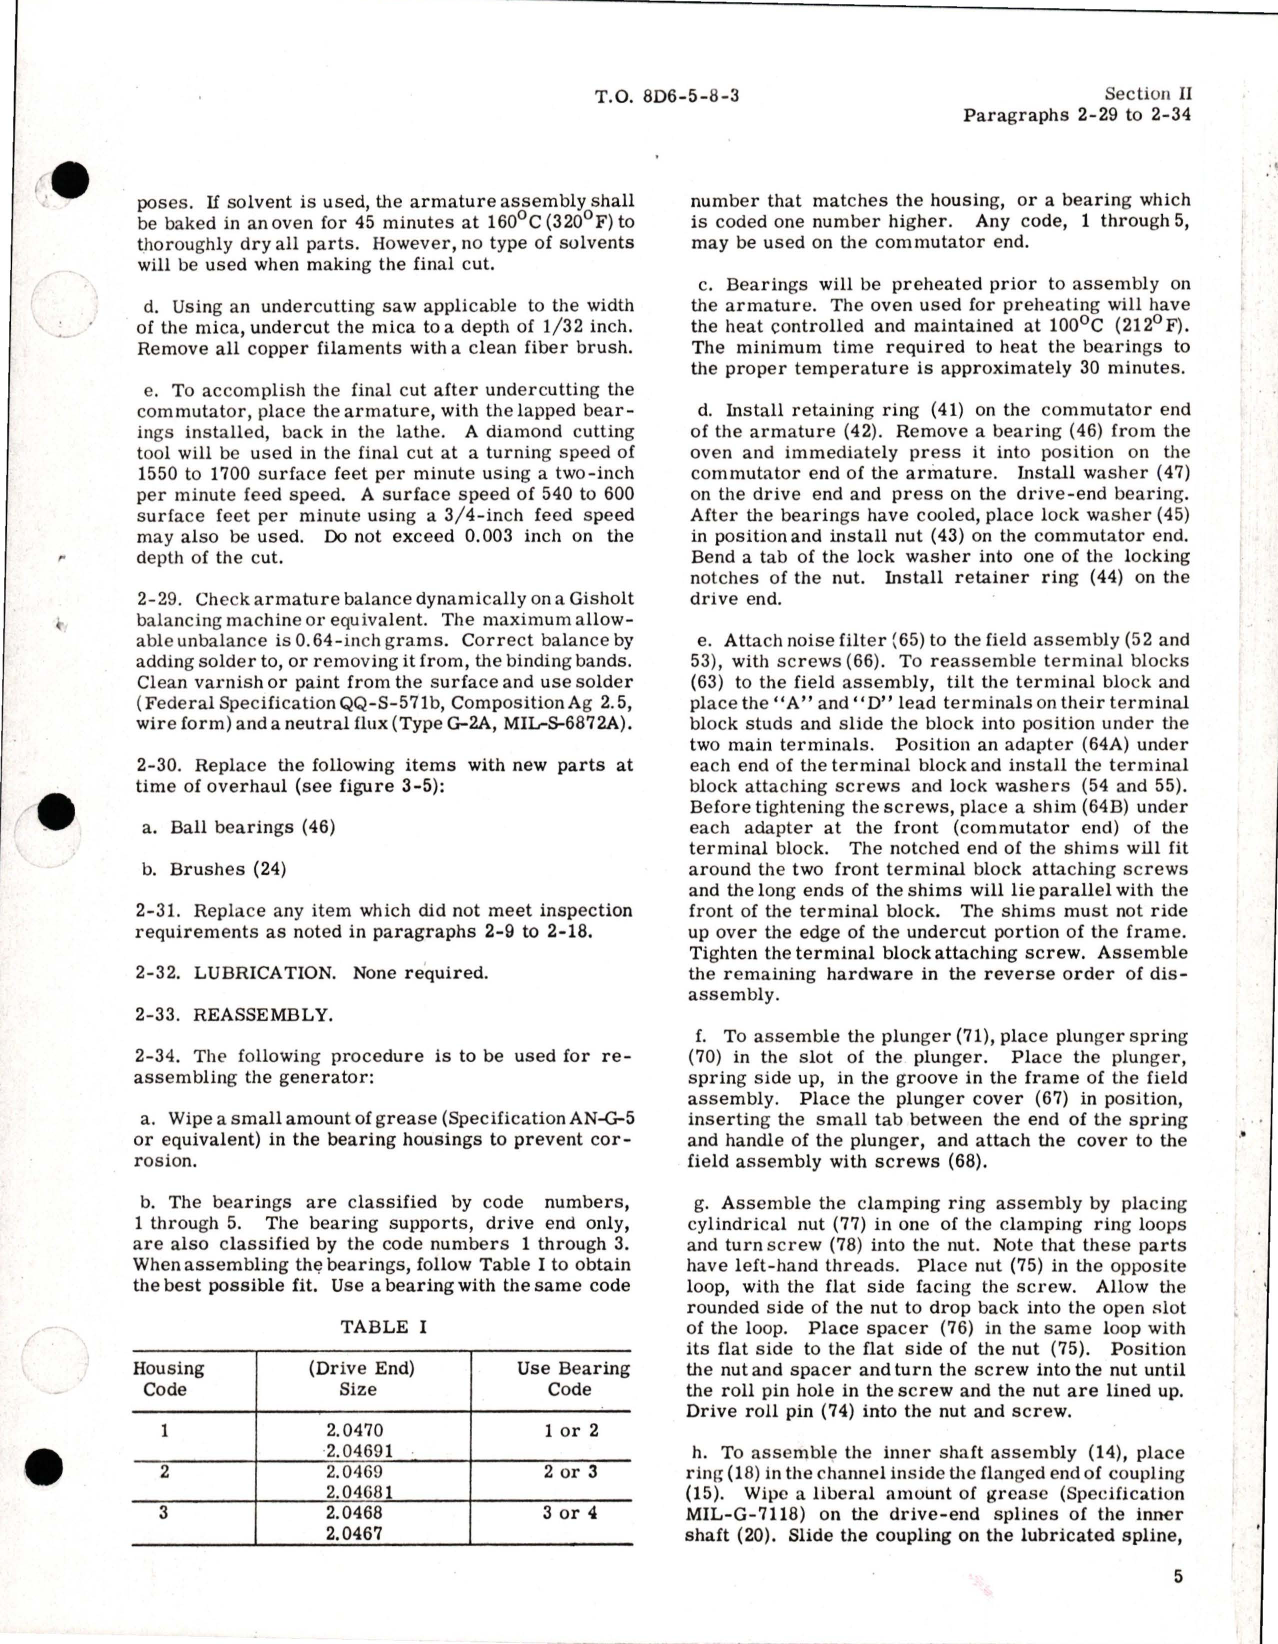 Sample page 9 from AirCorps Library document: Overhaul for DC Generator 